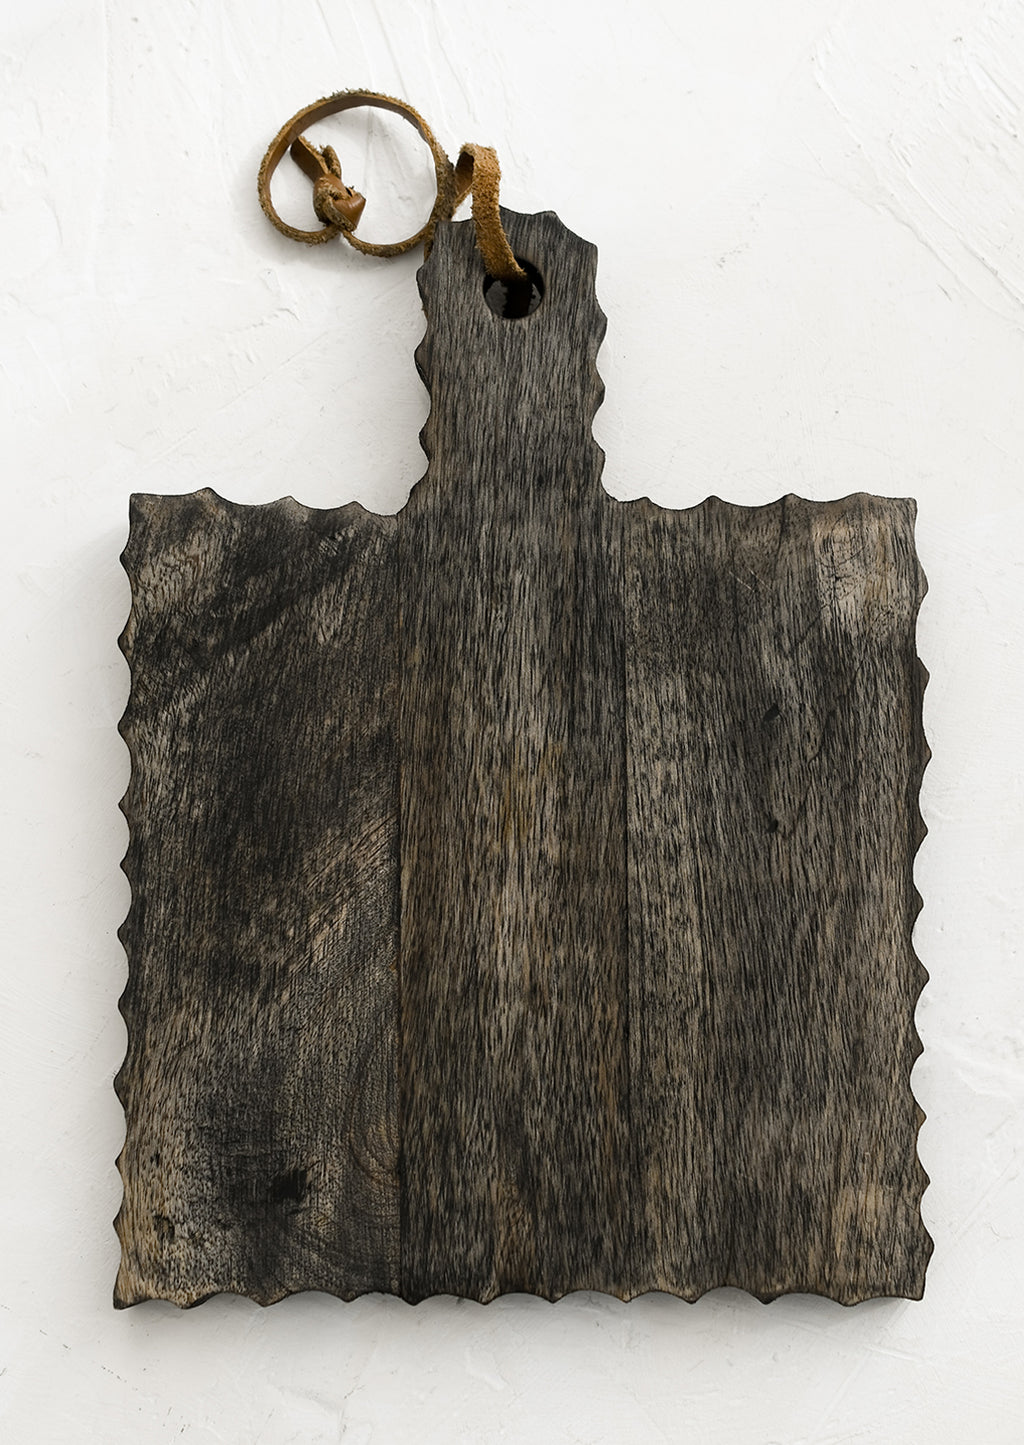 Small: A square, paddle-shaped cutting board with carved/fluted edges and leather tie.